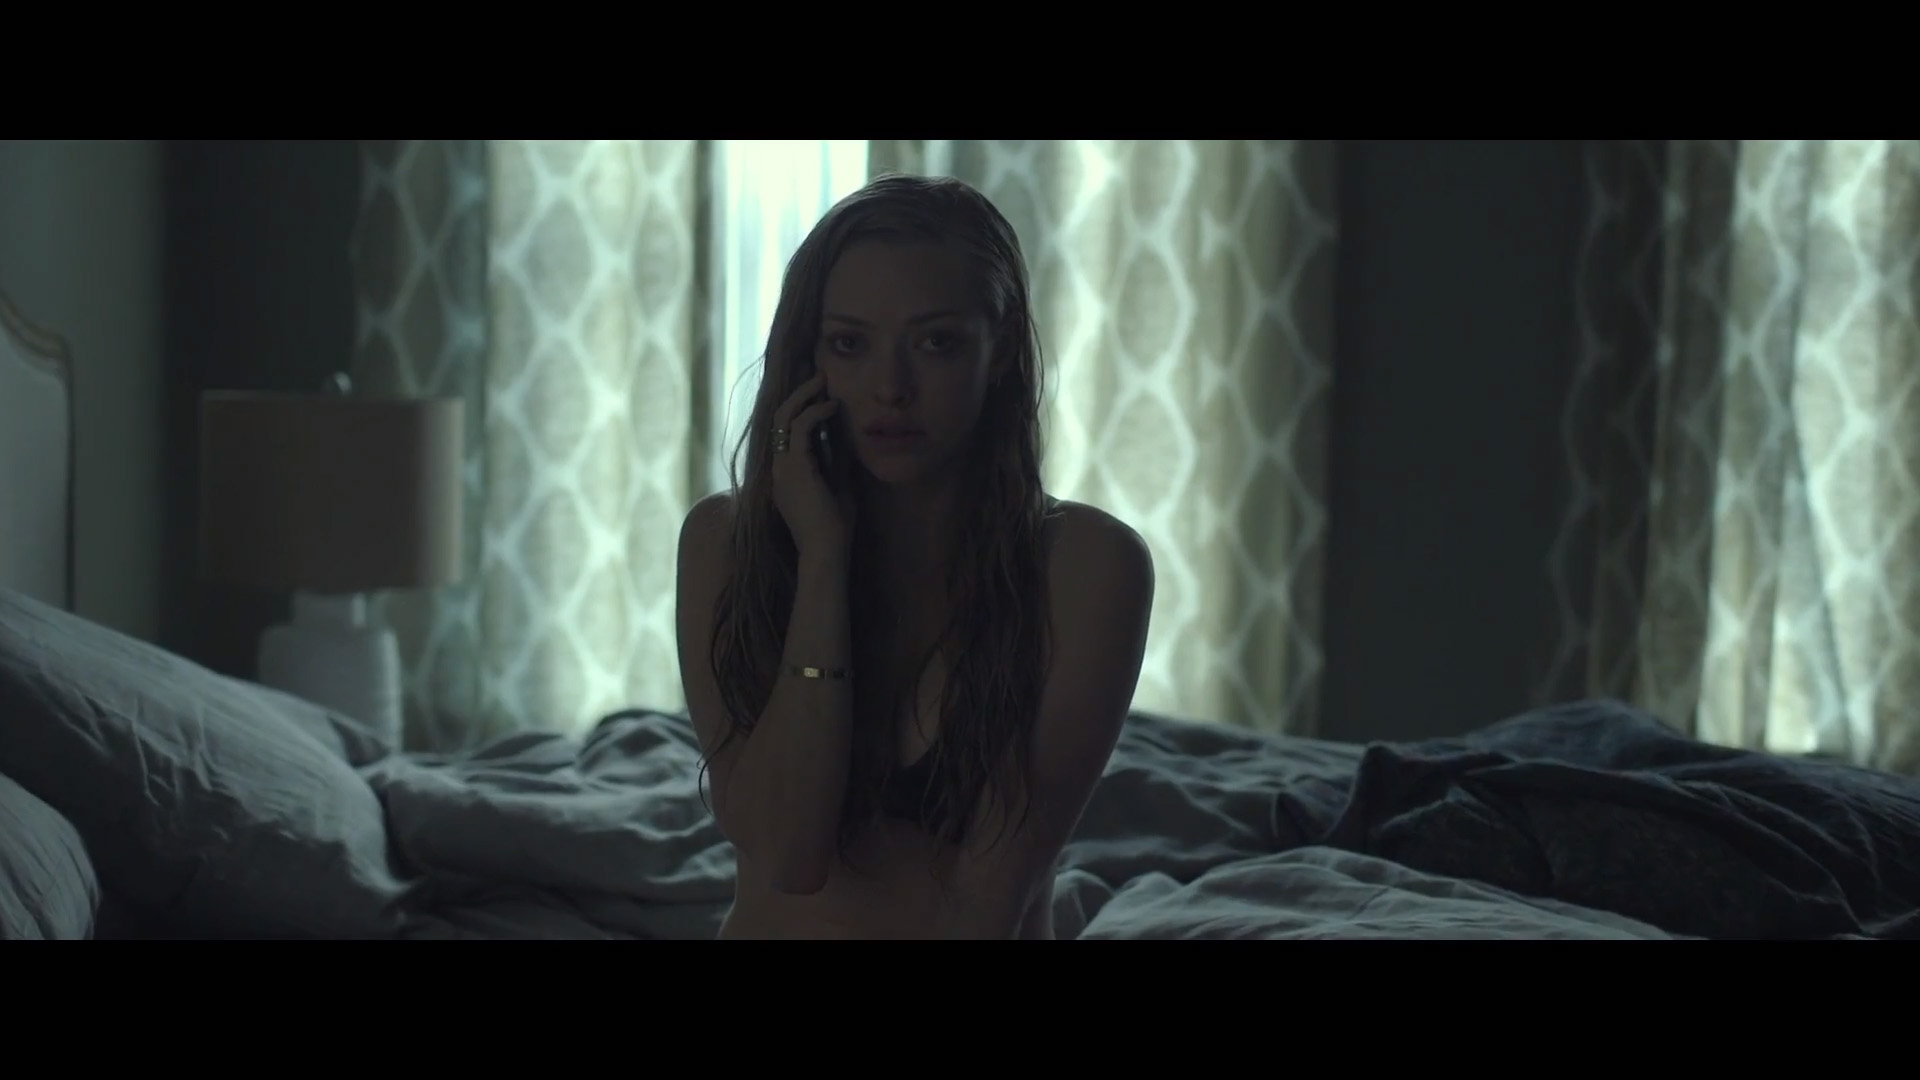 Lost Souls (Movie: Fathers & Daughters)